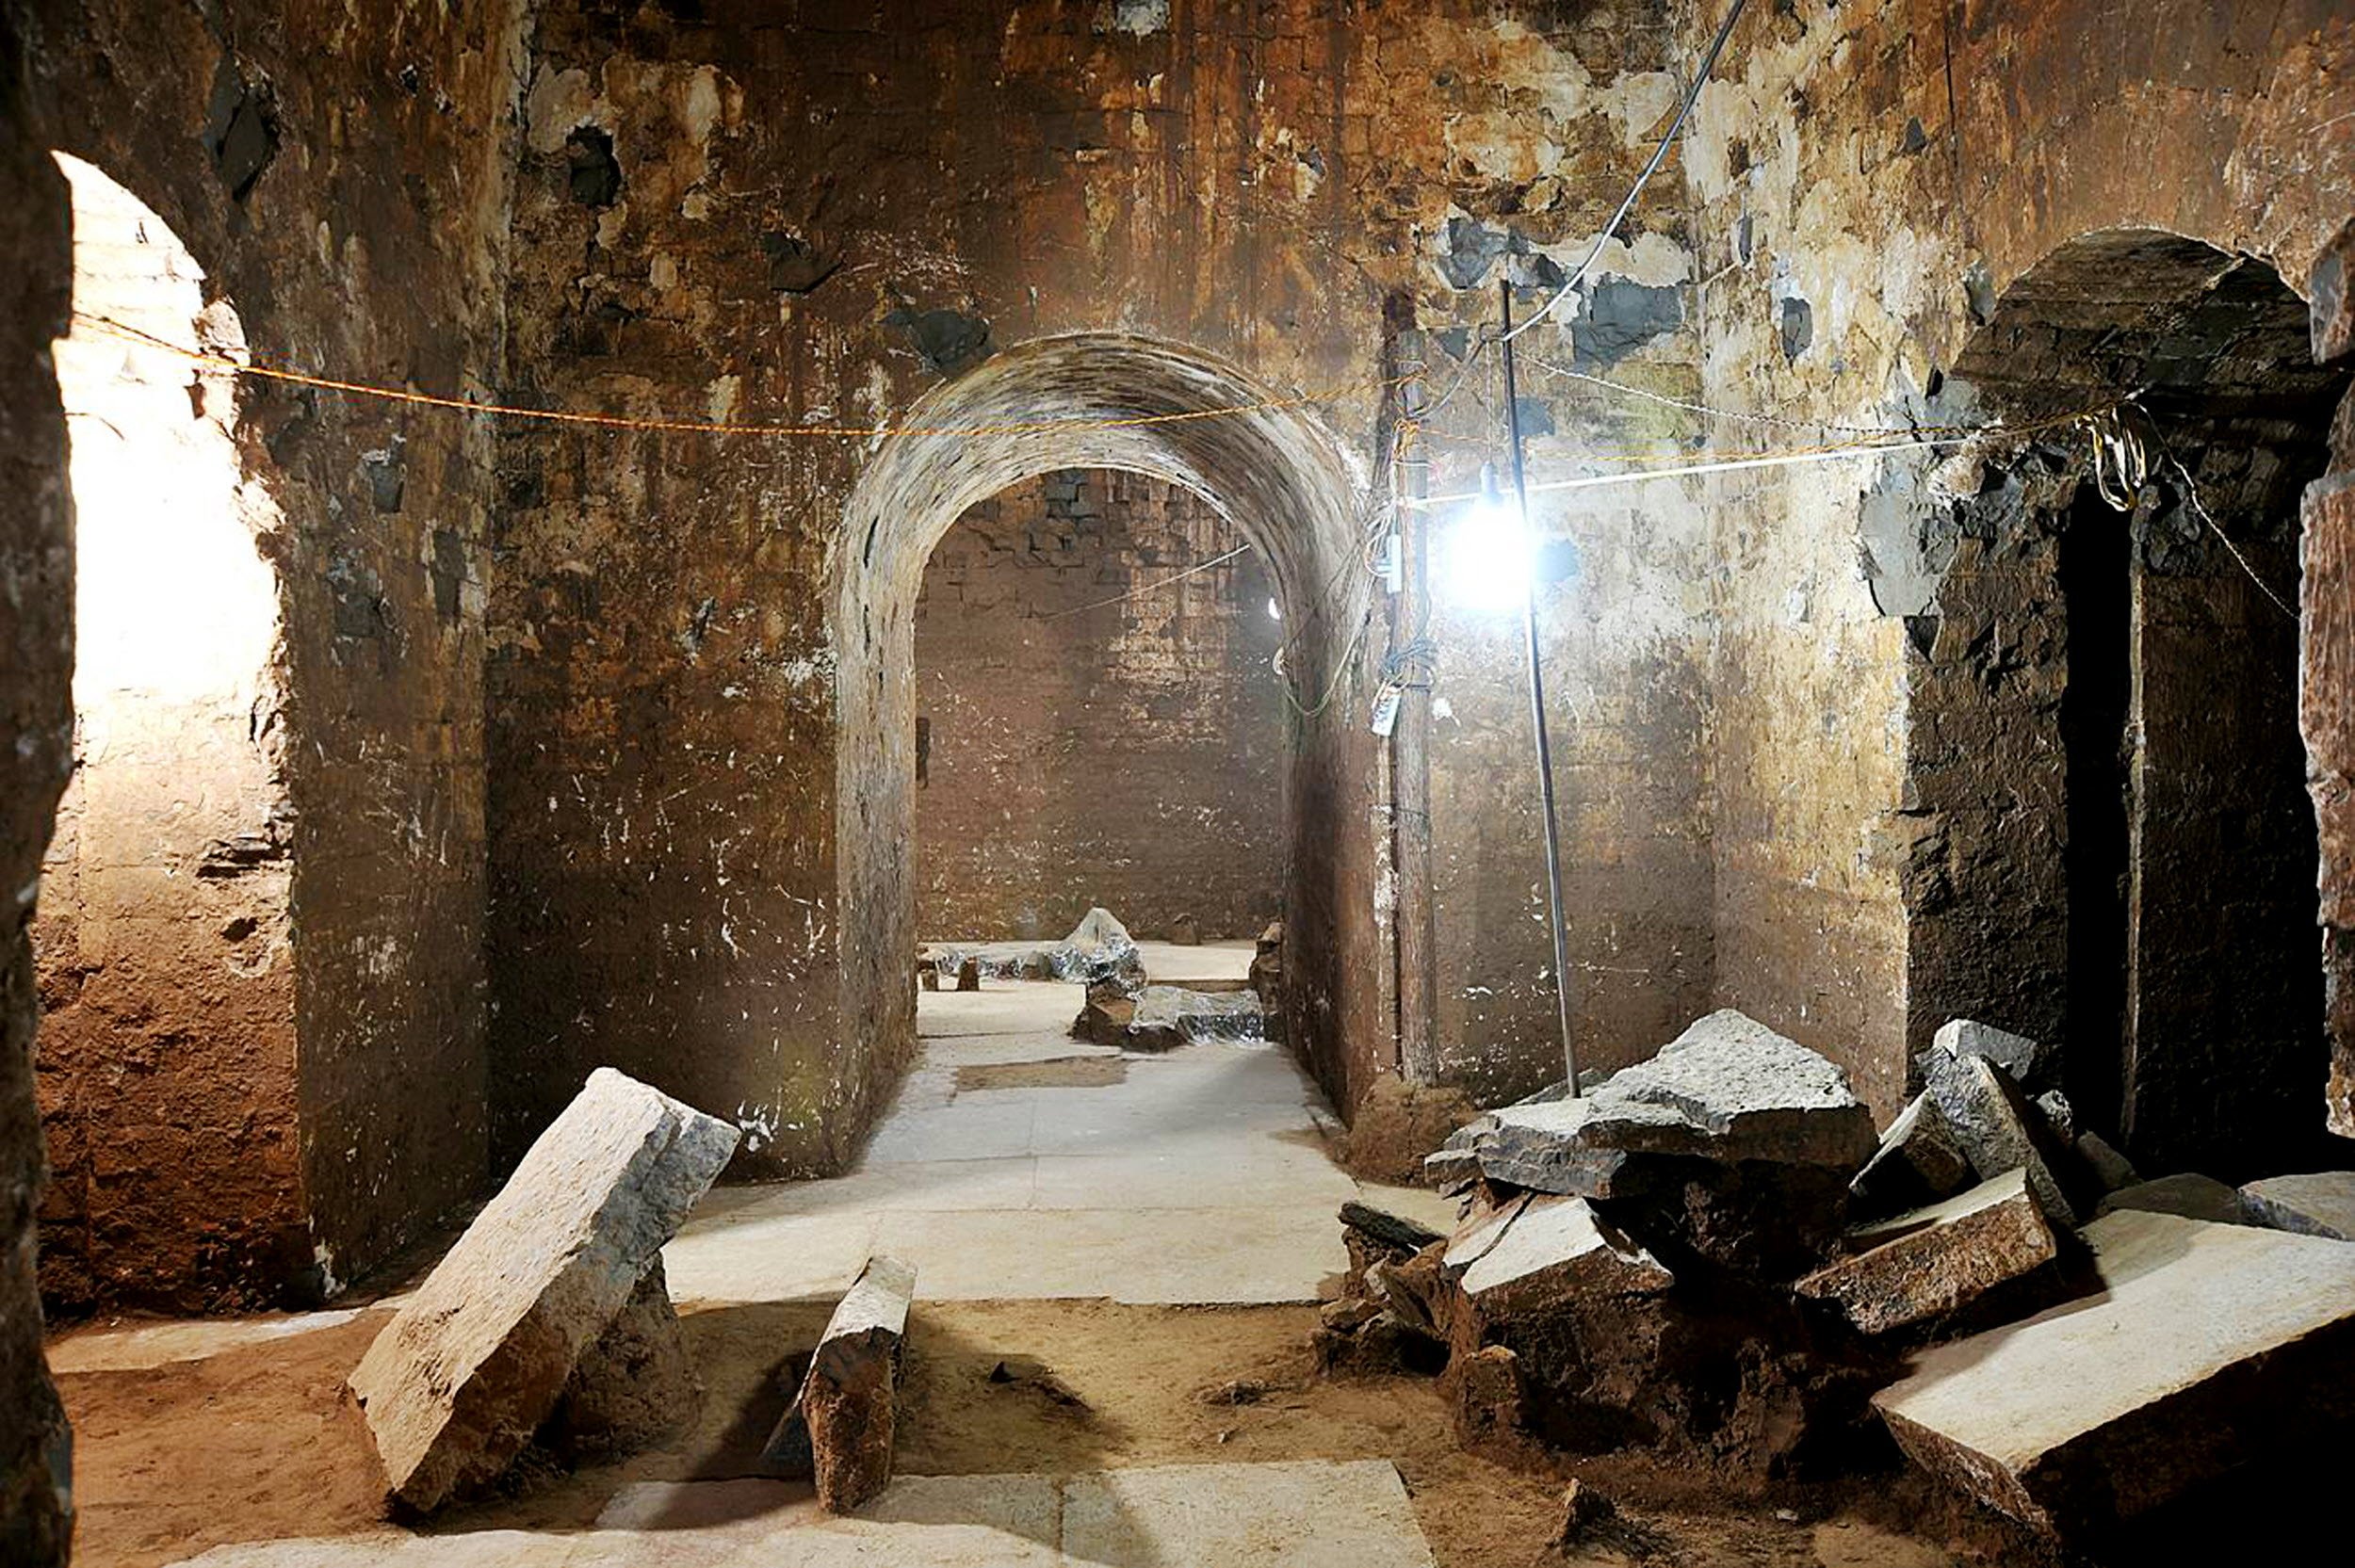 This photo released by archaeologists from China's Henan cultural relic bureau on December 27, 2009 shows the interior of a nearly 1,800-year-old tomb which was found by Chinese archaeologists and believed belonging to the legendary ruler Cao Cao, located in central Henan province, not far from the Yellow River and near the city of Anyang where Cao Cao ruled the Kingdom of Wei from 208 to 220. The tomb was discovered about a year ago, but only became known to authorities after stone tablets carrying inscriptions of "King Wu of Wei" were seized from alleged tomb raiders, a report said. CHINA OUT AFP PHOTO